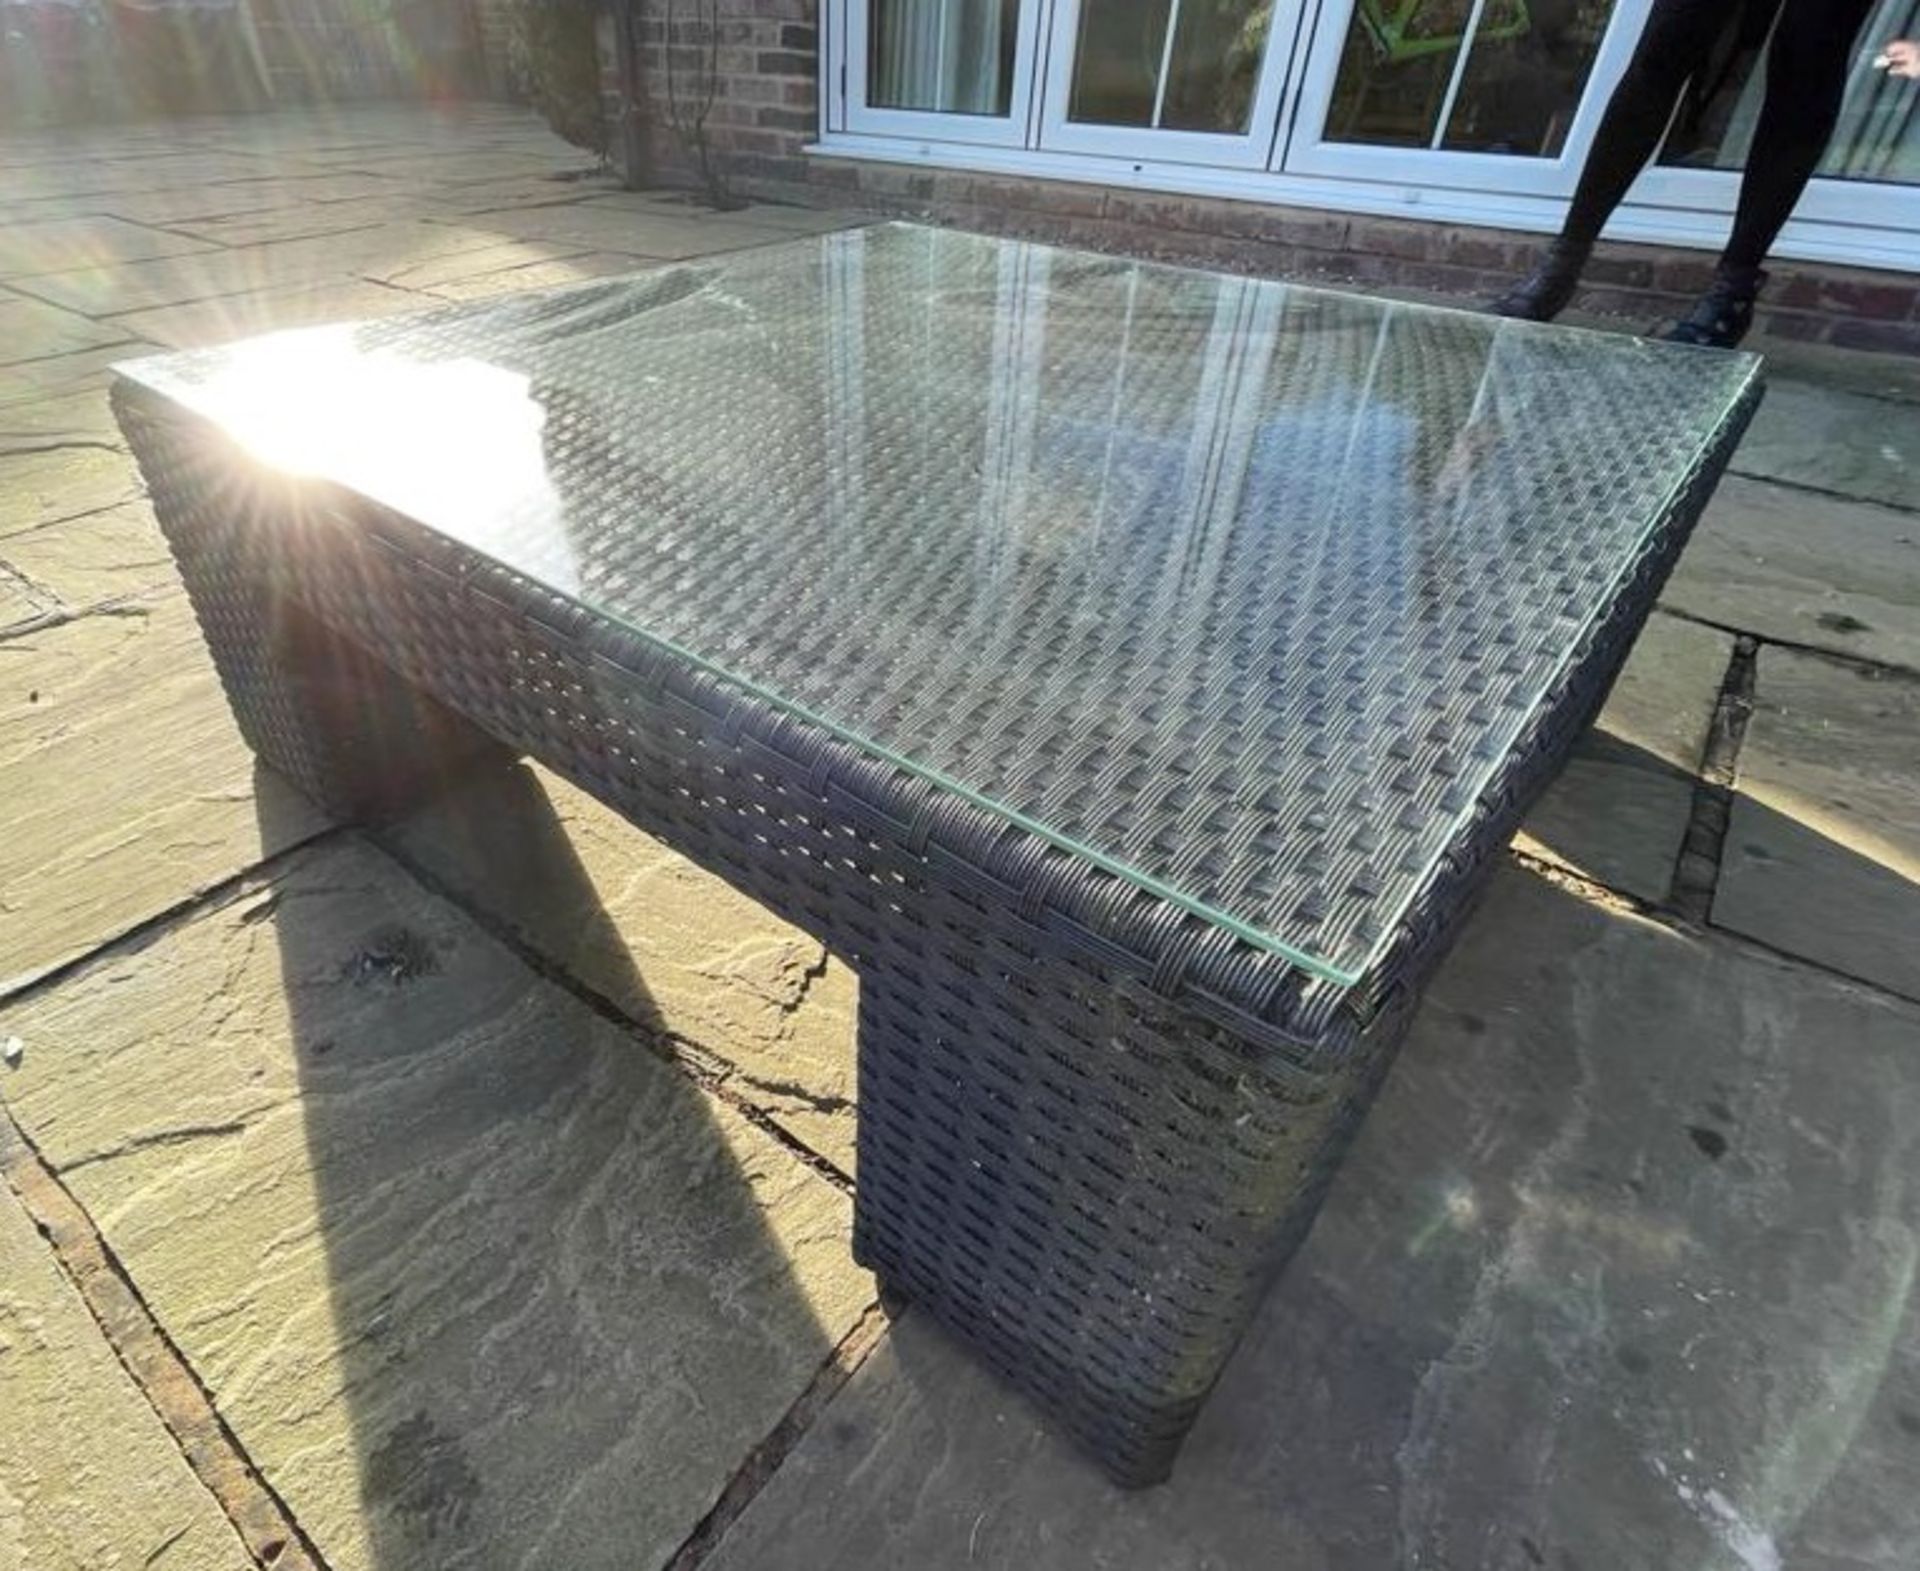 1 x Westminster Low Rattan Garden Table With Glass Top - Size: H32 x W88 x D88 cms - CL650 -